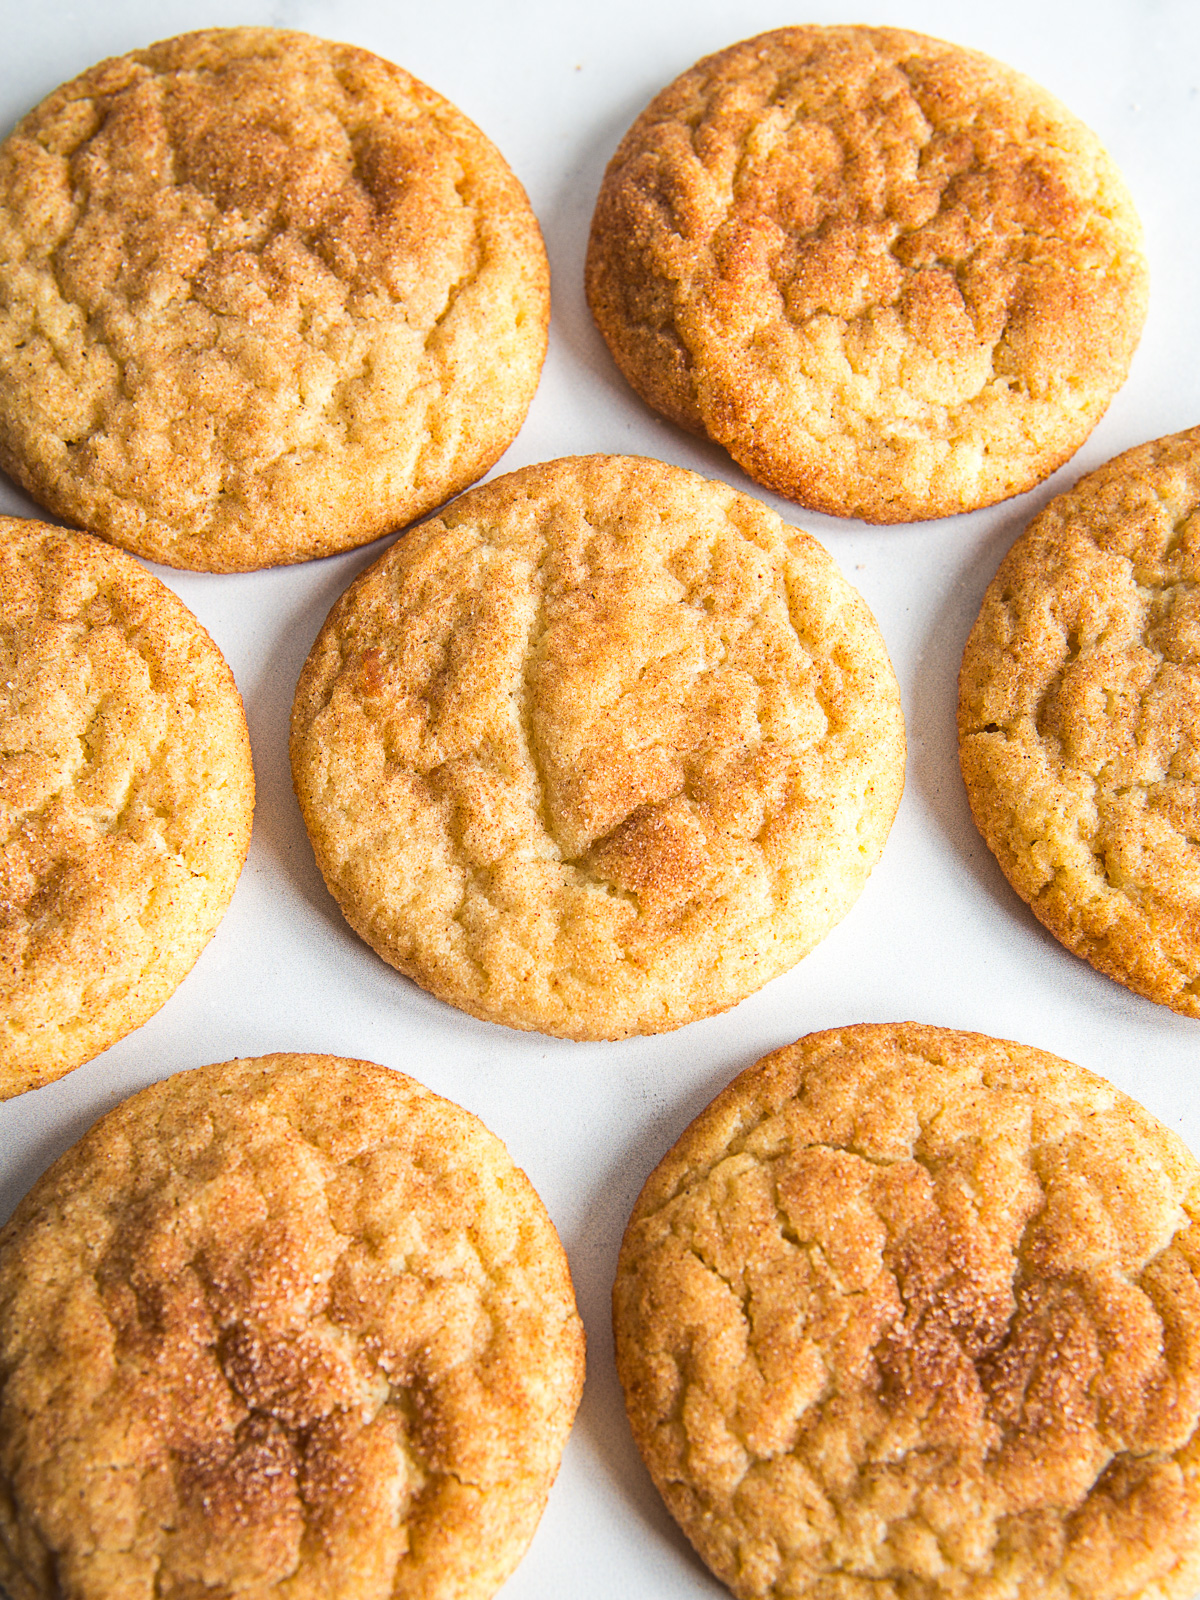 Gluten-free snickerdoodles on the counter.